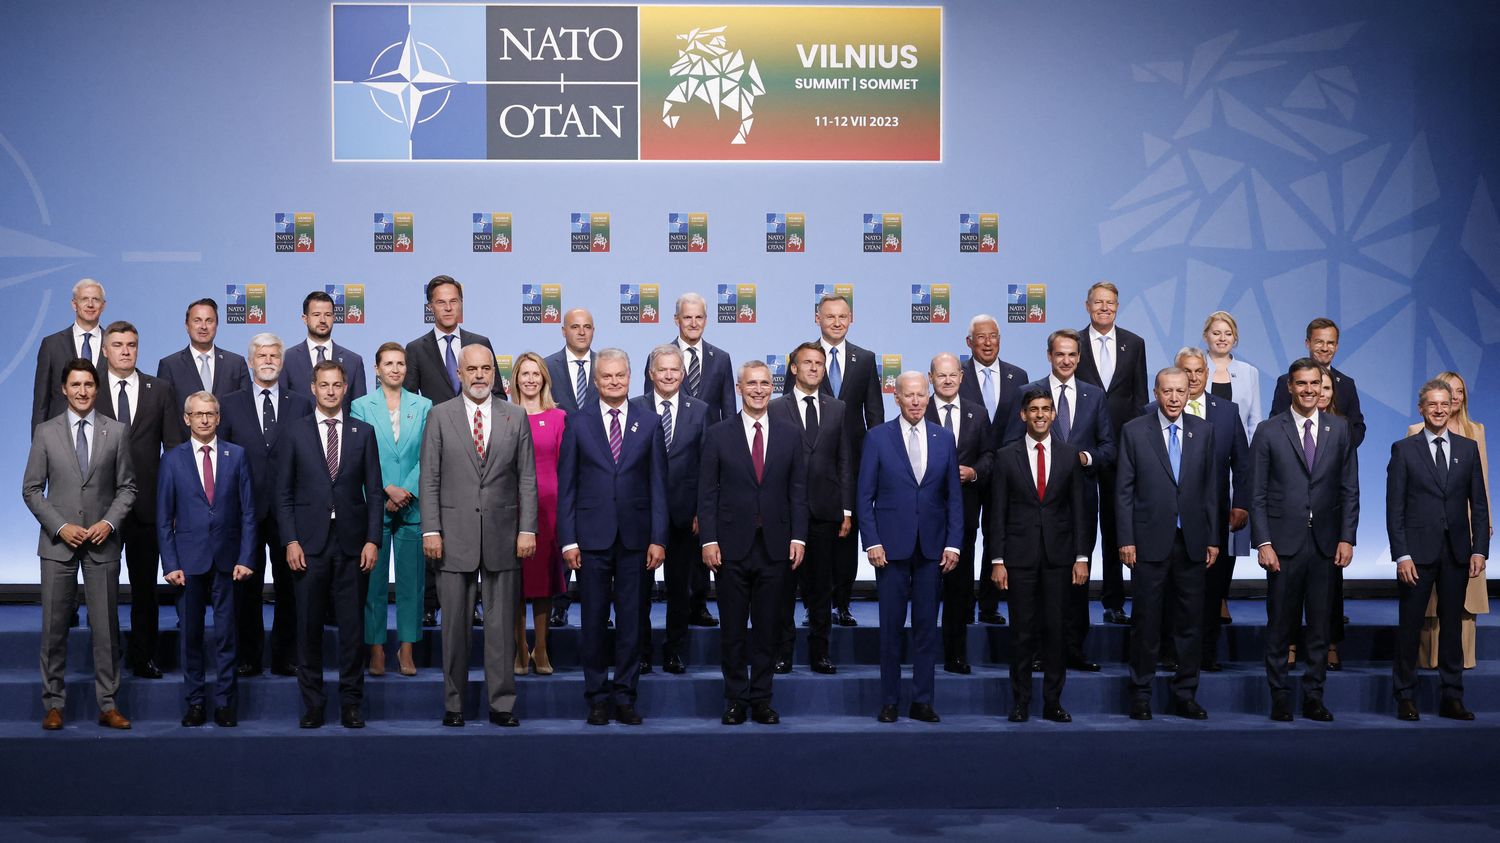  MAP.  NATO summit in Lithuania: who are the 31 countries that have joined the alliance since 1949?
